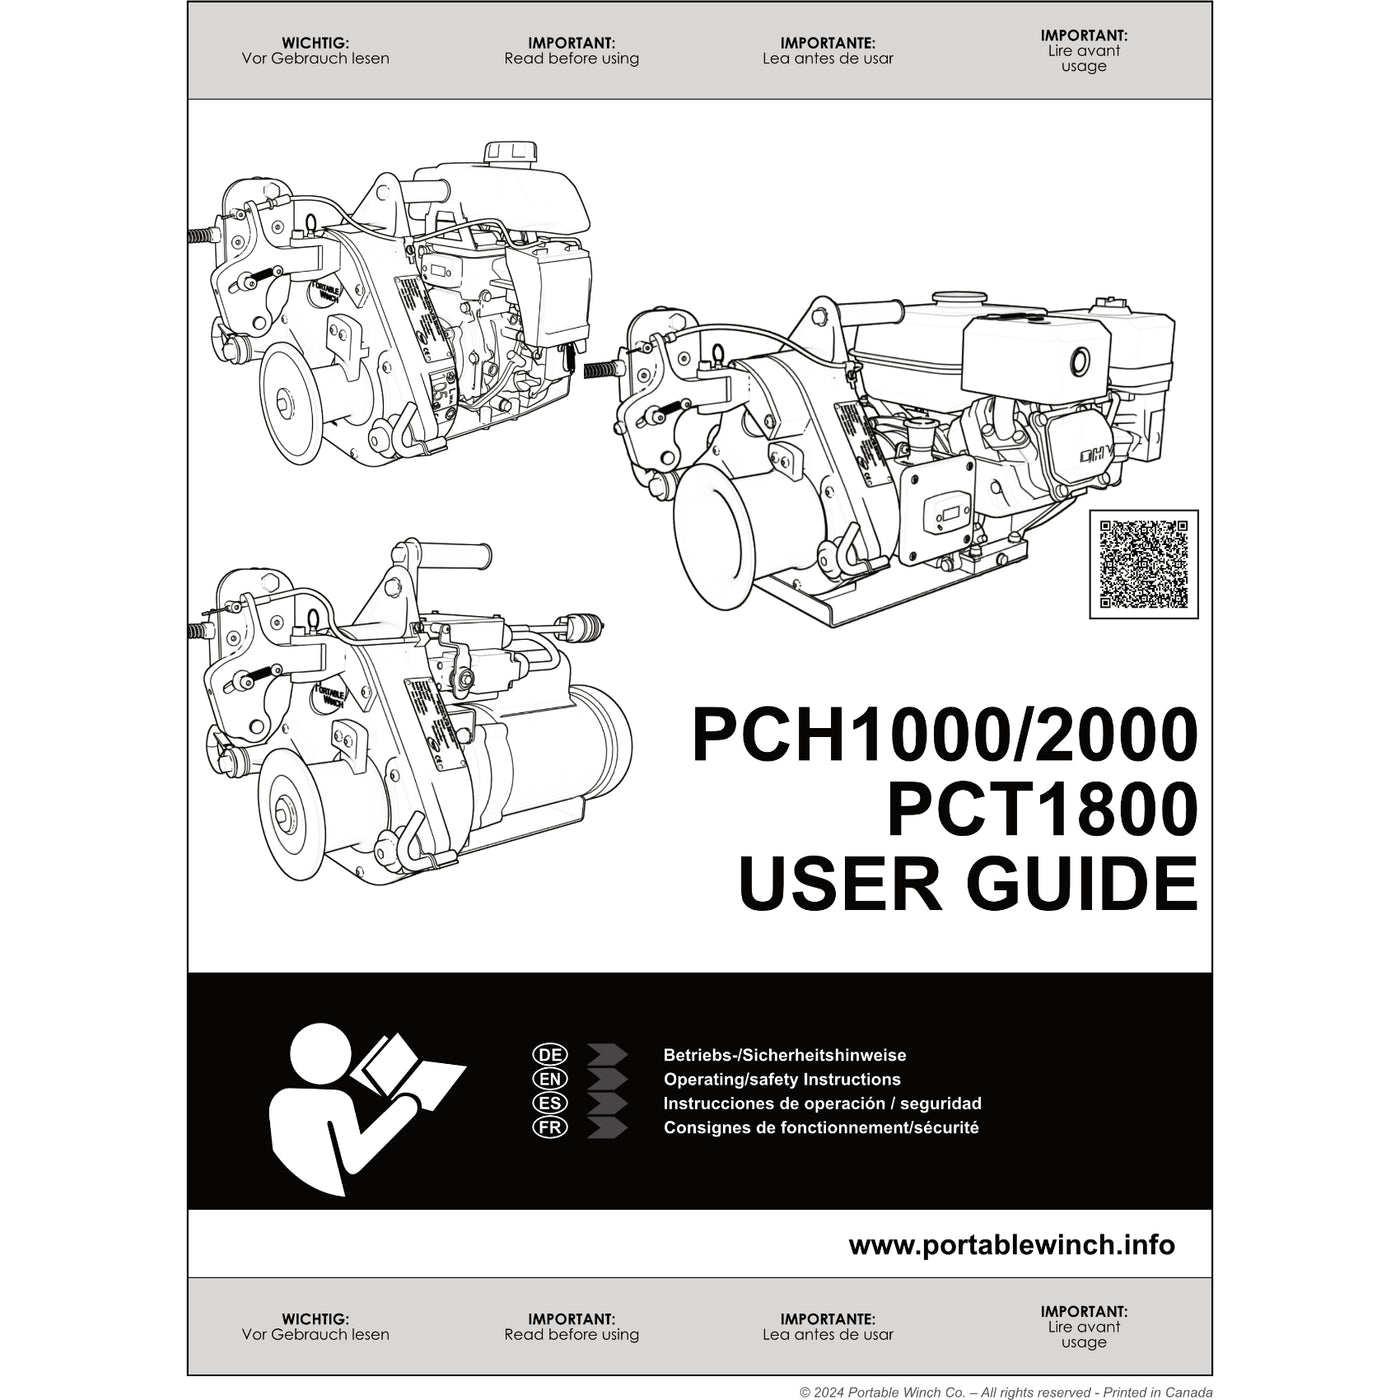 User Guide for PCH1000, PCH2000, PCT1800